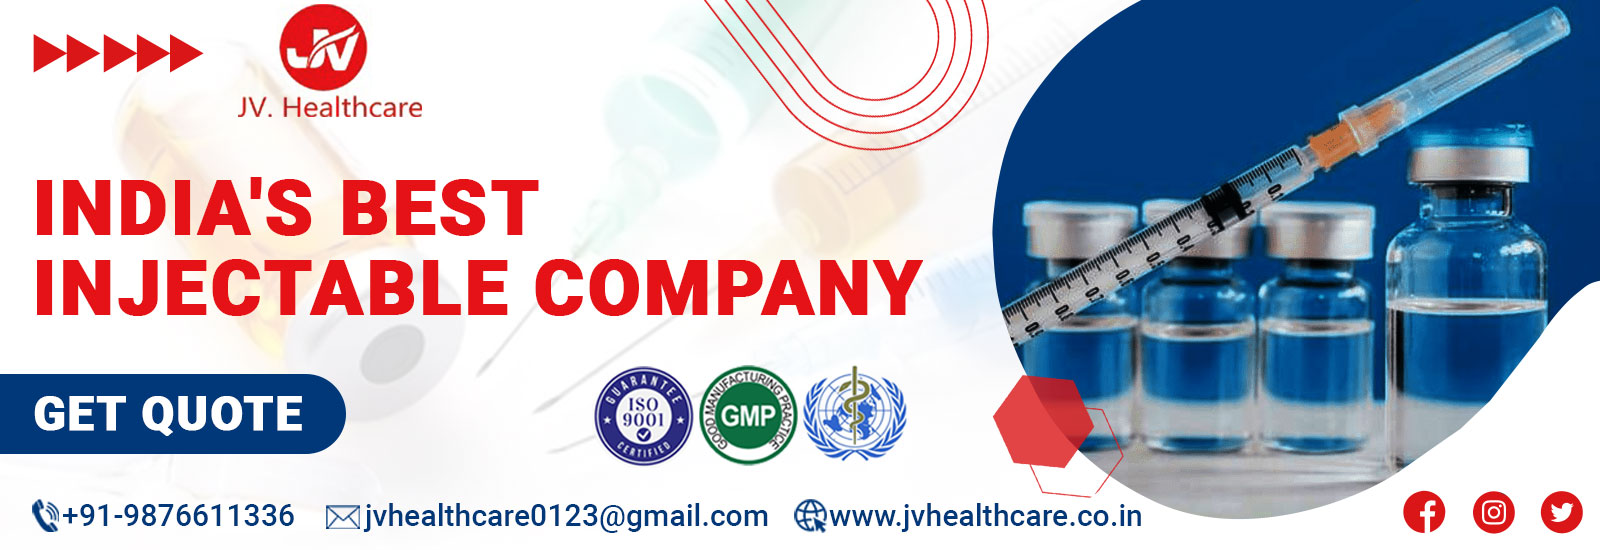 Pharma Franchise For Injectable Curing Ailments in the Quickest Way Possible | JV Healthcare